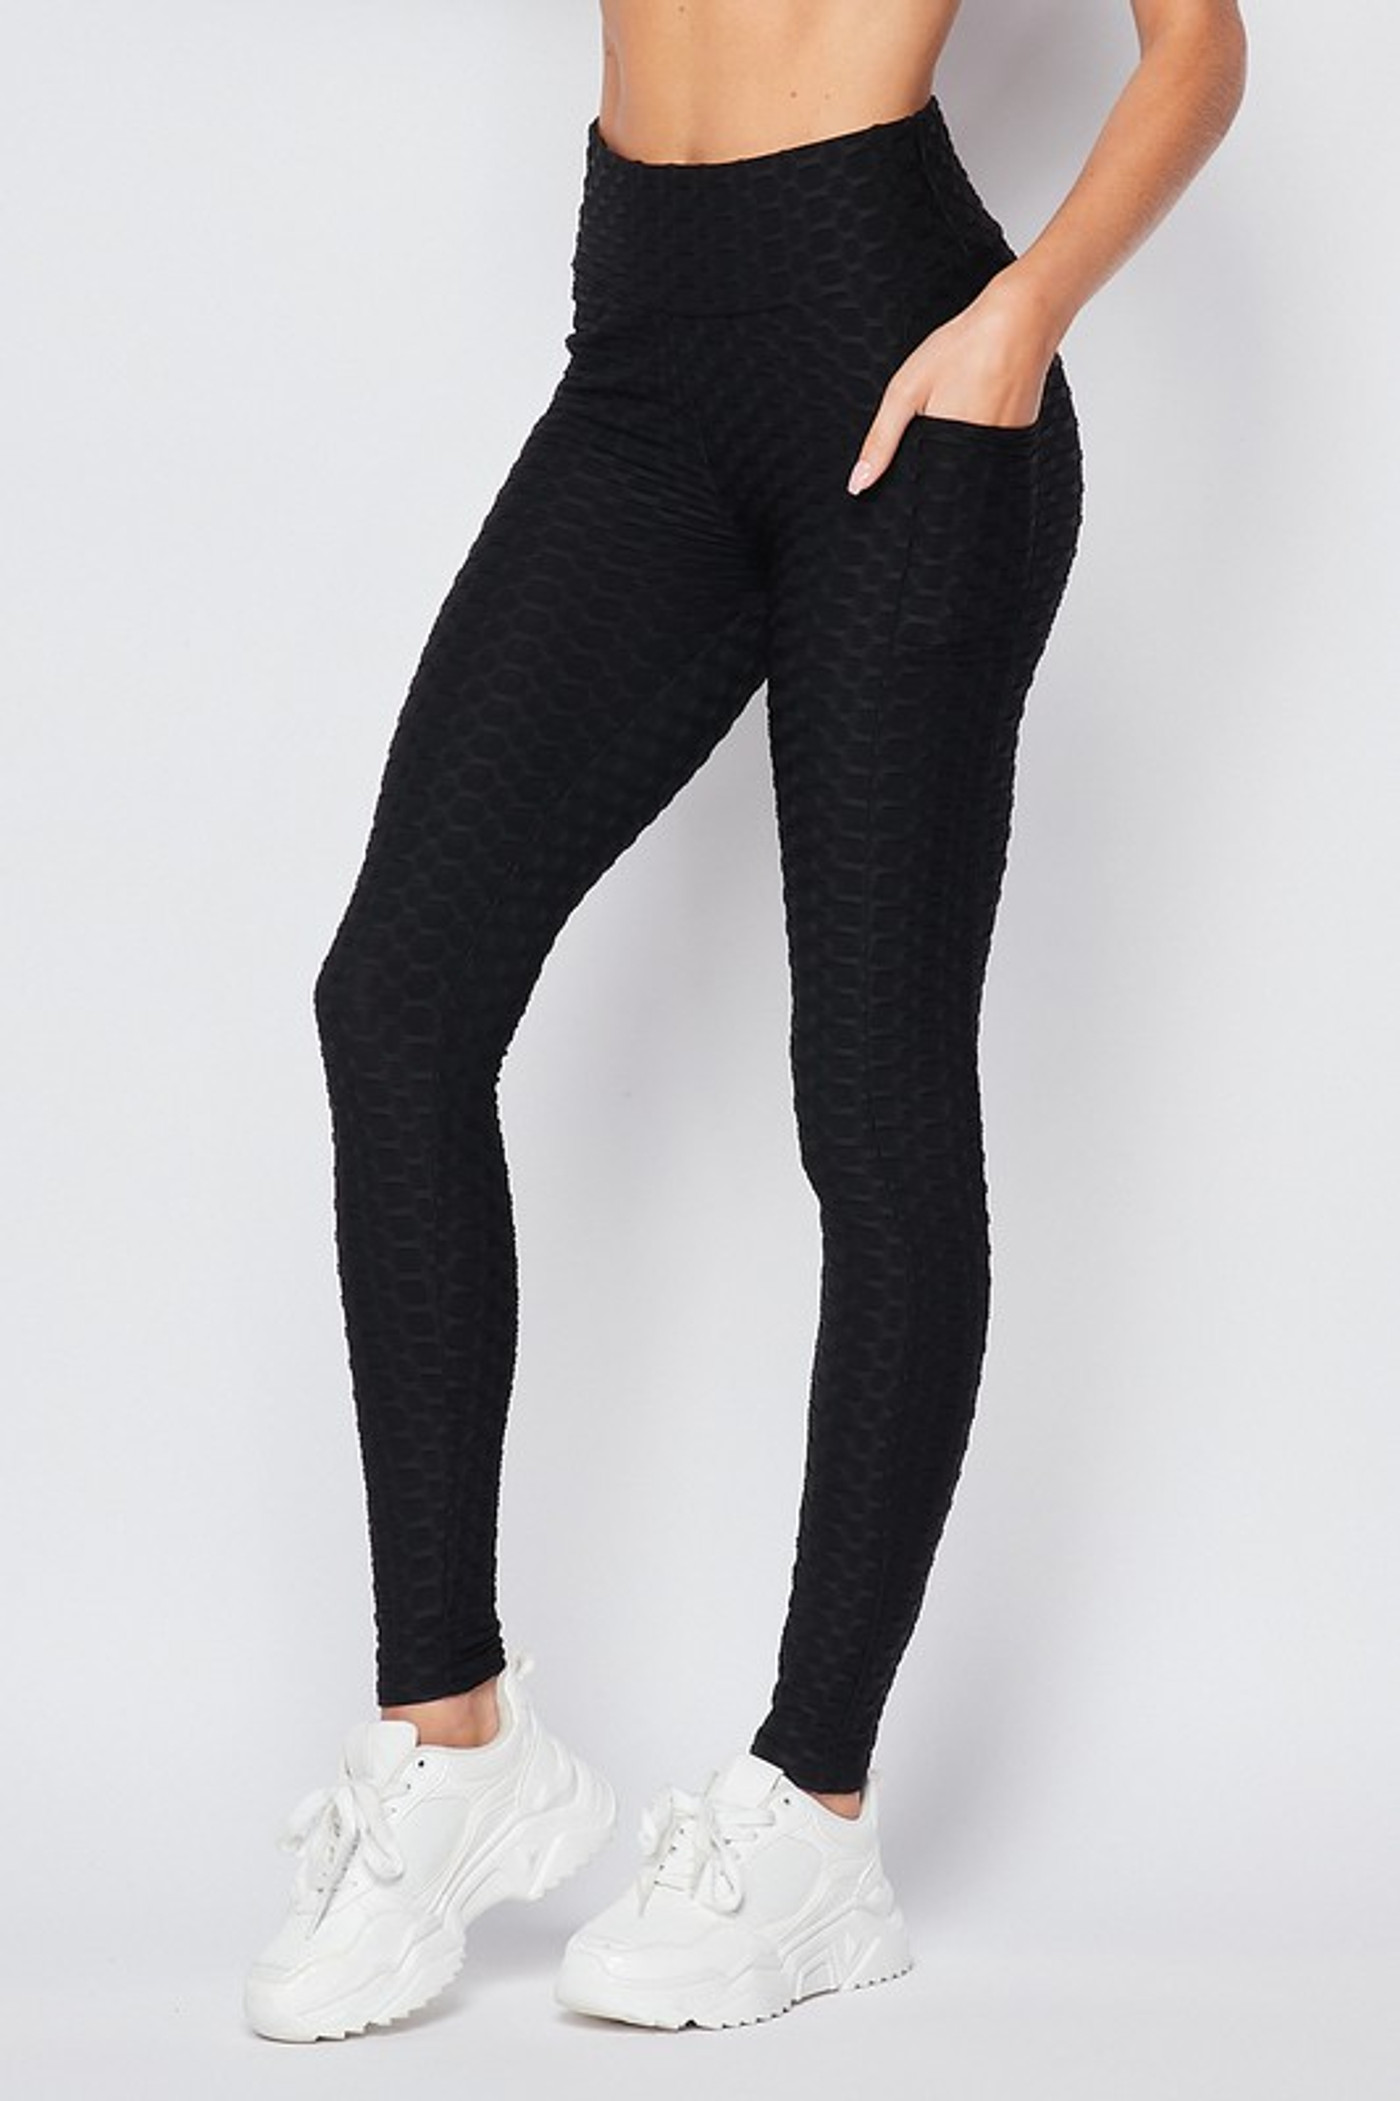 Left side of Black Scrunch Butt Popcorn Textured High Waisted Leggings with Pockets - Zinati (W&J)